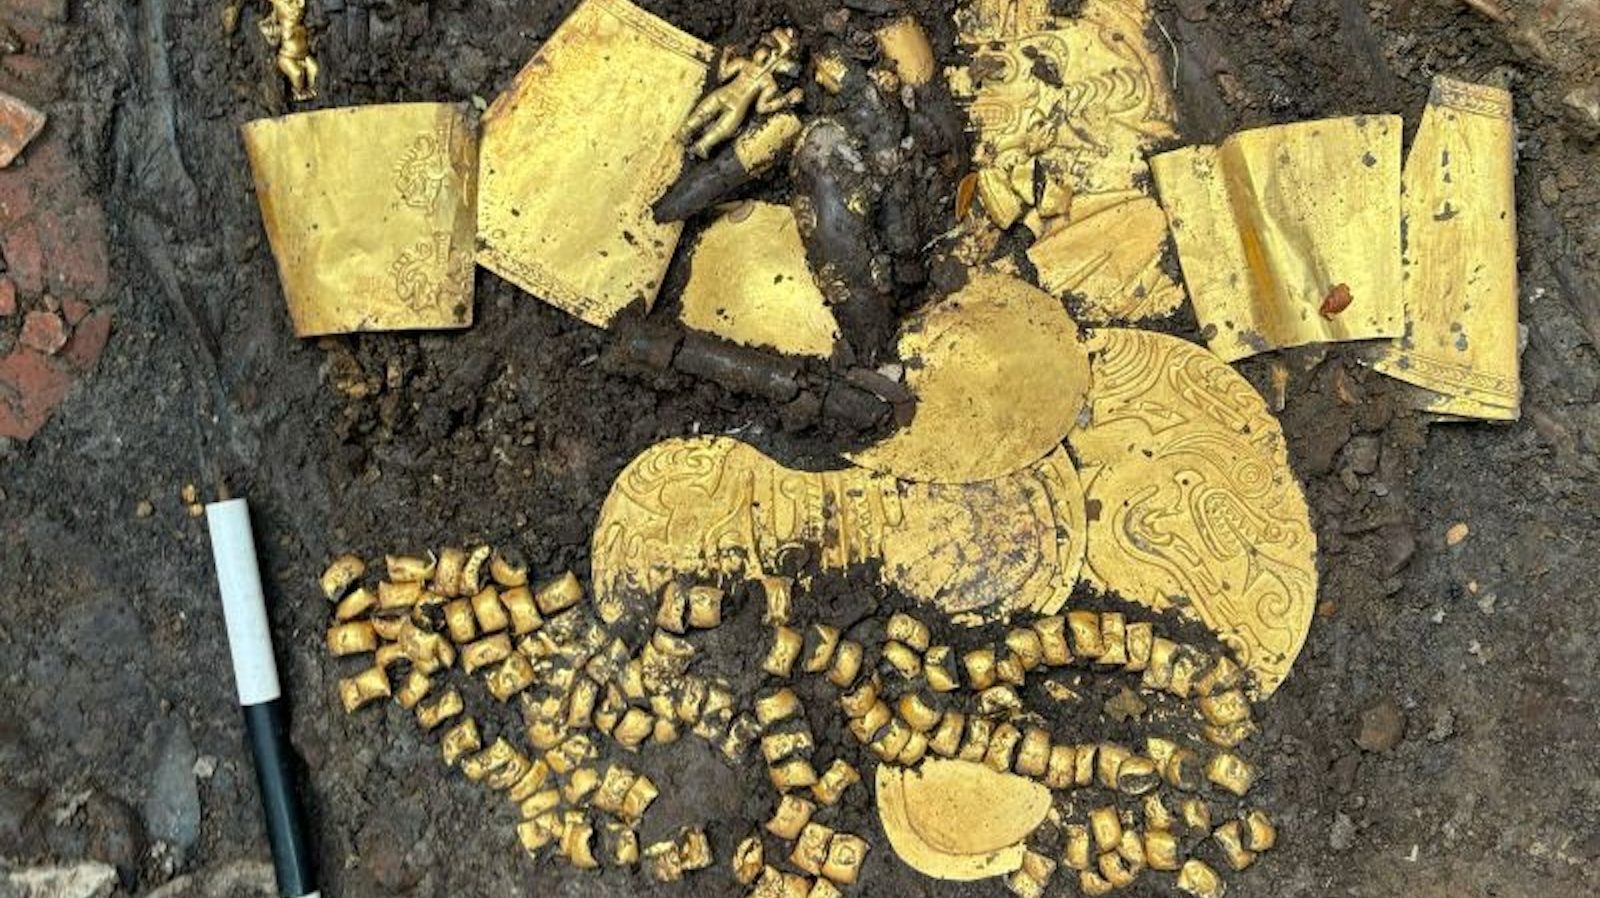 An ancient priest’s tomb filled with gold and the bodies of several sacrifices was found at an archaeological site in Panama